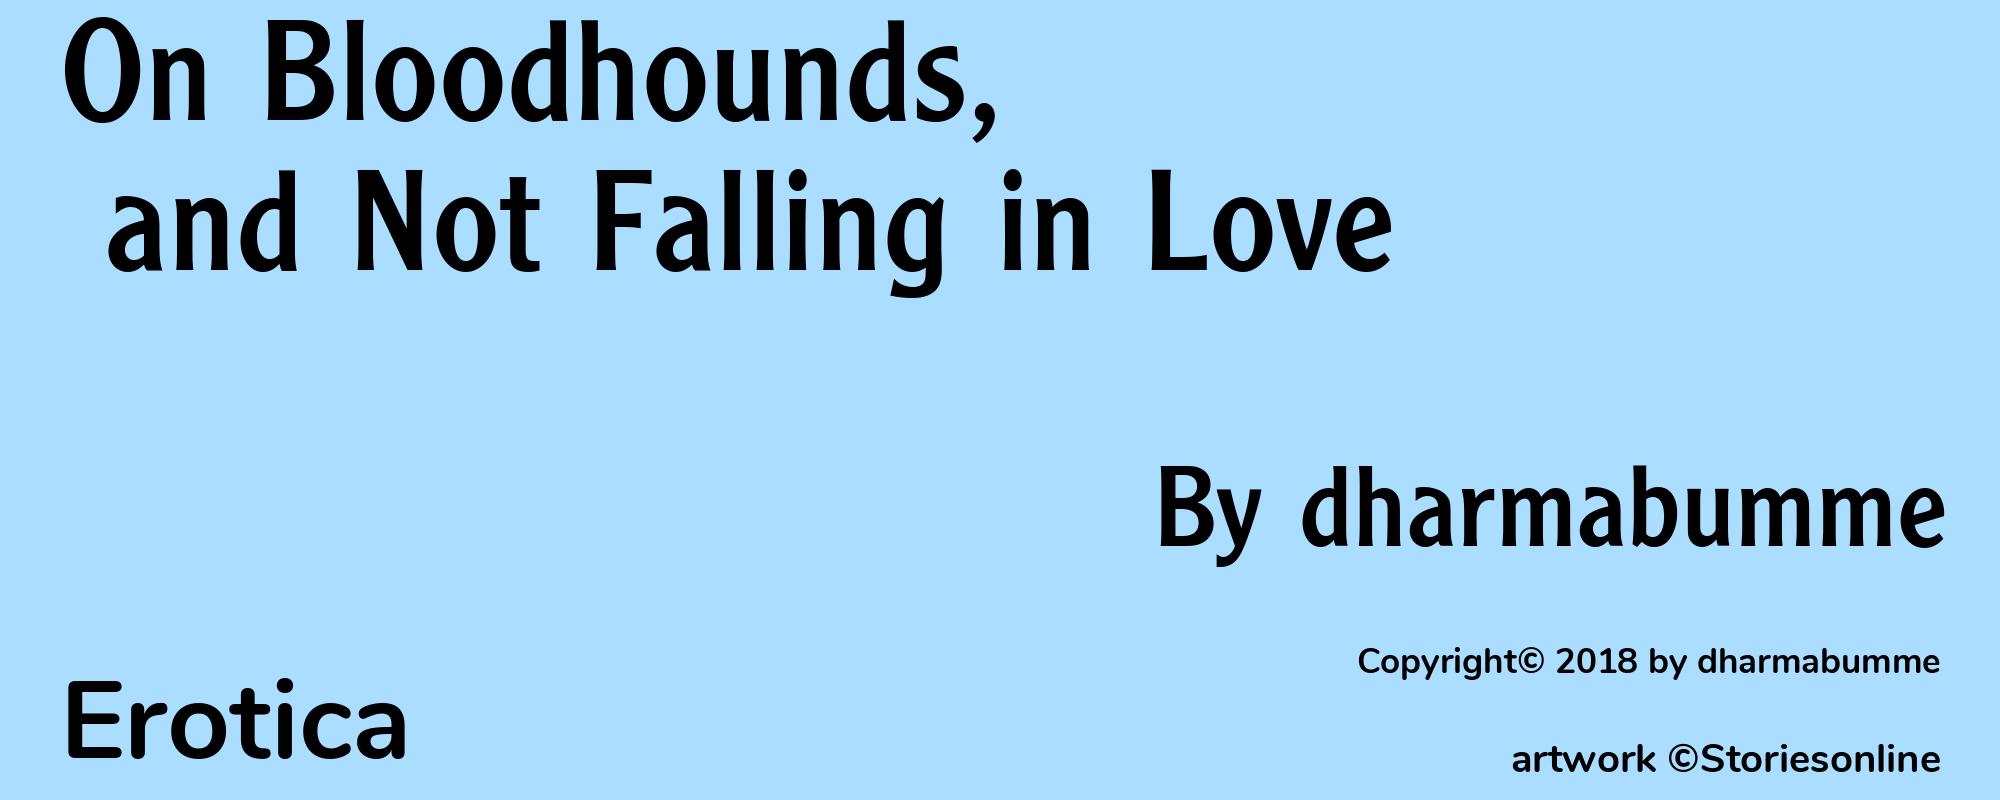 On Bloodhounds, and Not Falling in Love - Cover